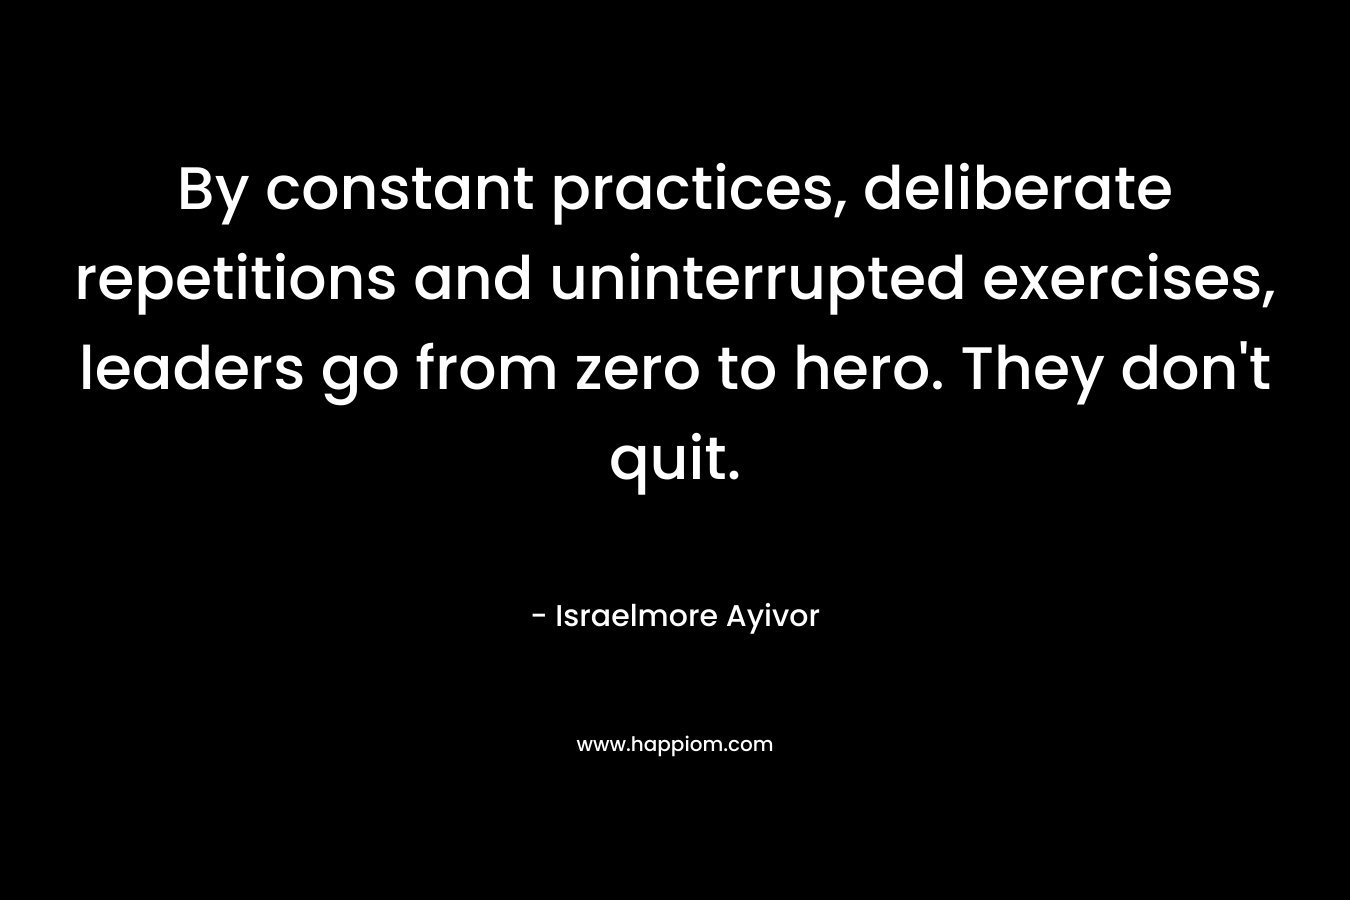 By constant practices, deliberate repetitions and uninterrupted exercises, leaders go from zero to hero. They don’t quit. – Israelmore Ayivor